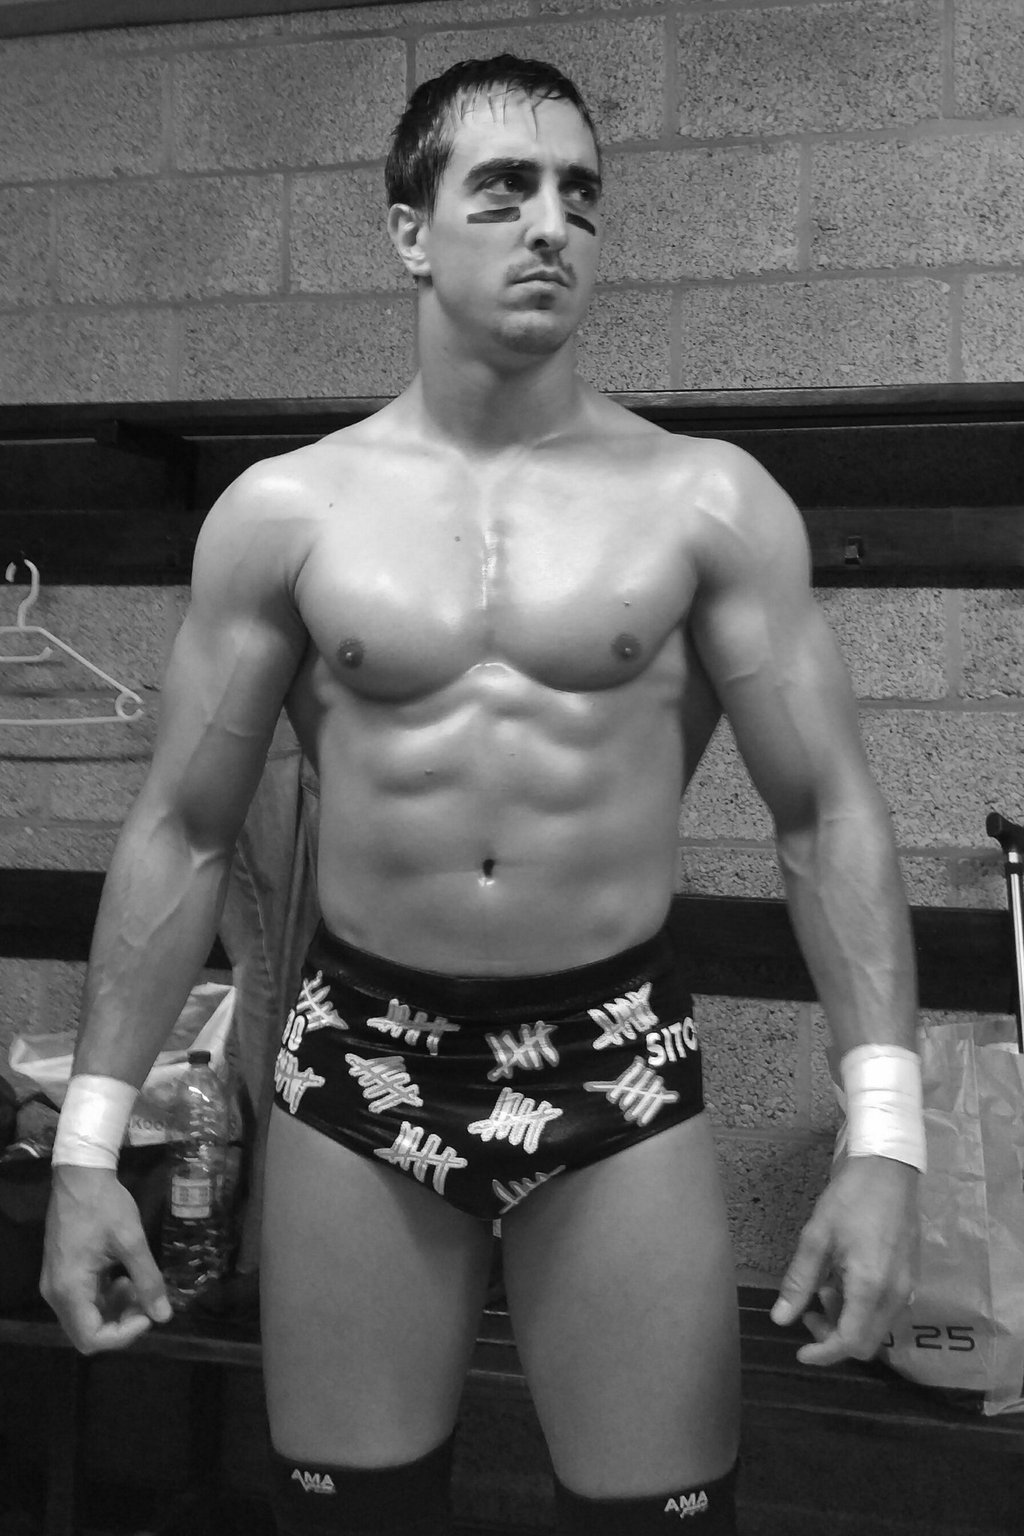 http://vignette2.wikia.nocookie.net/prowrestling/images/8/8f/Sitoci_2016.jpg/revision/latest?cb=20160329063733